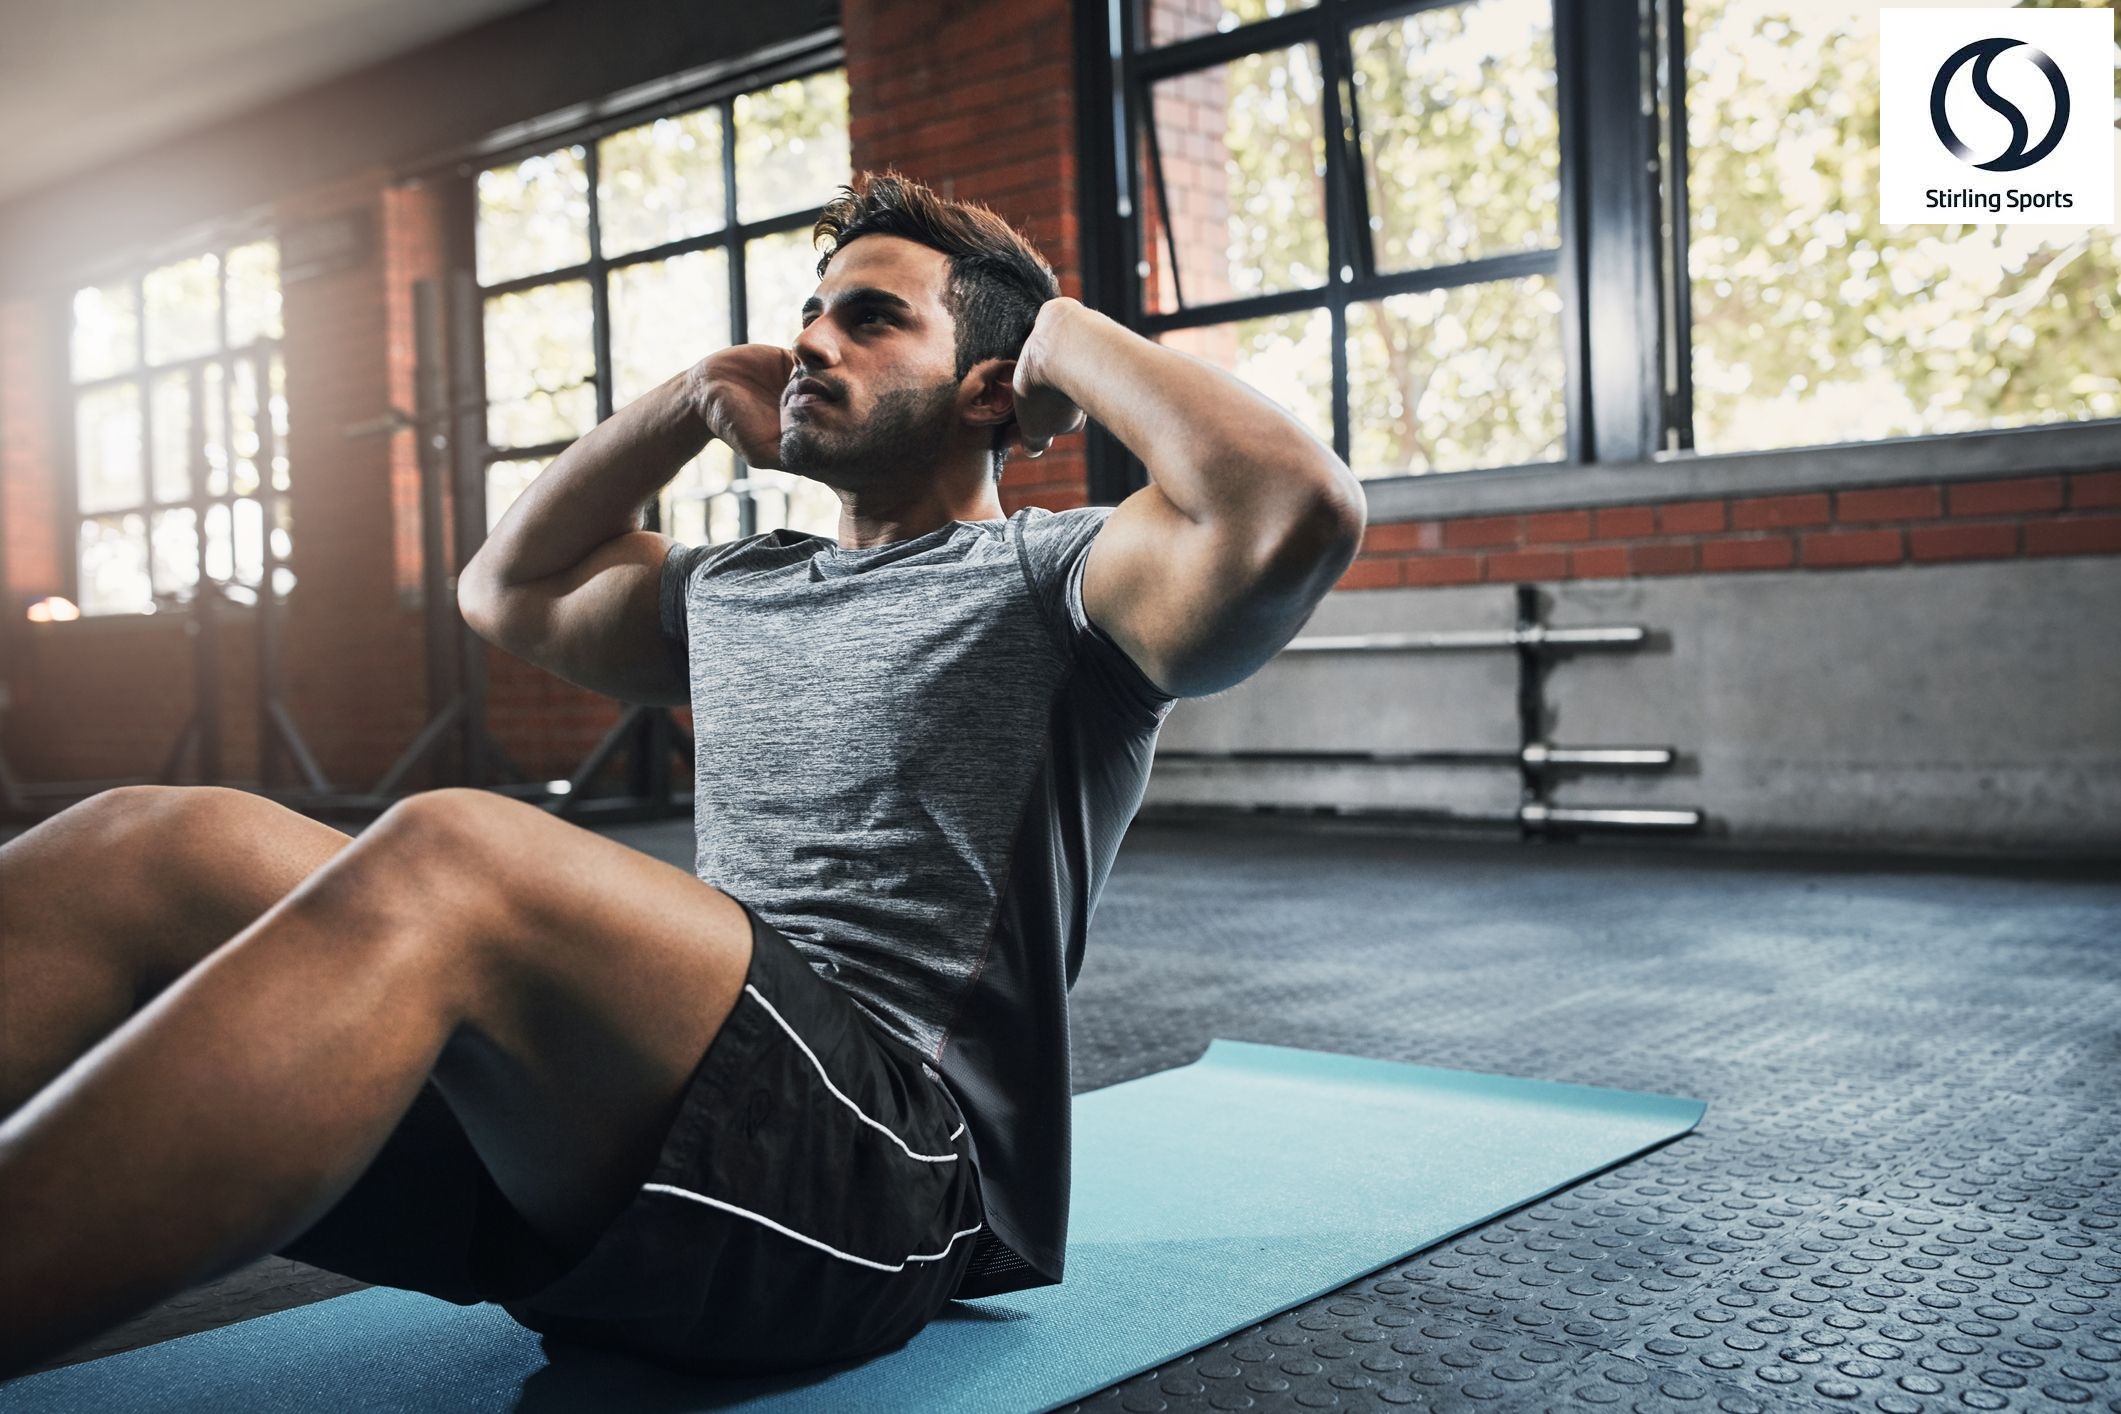 What Are The Must Have Gym Clothing For Men?